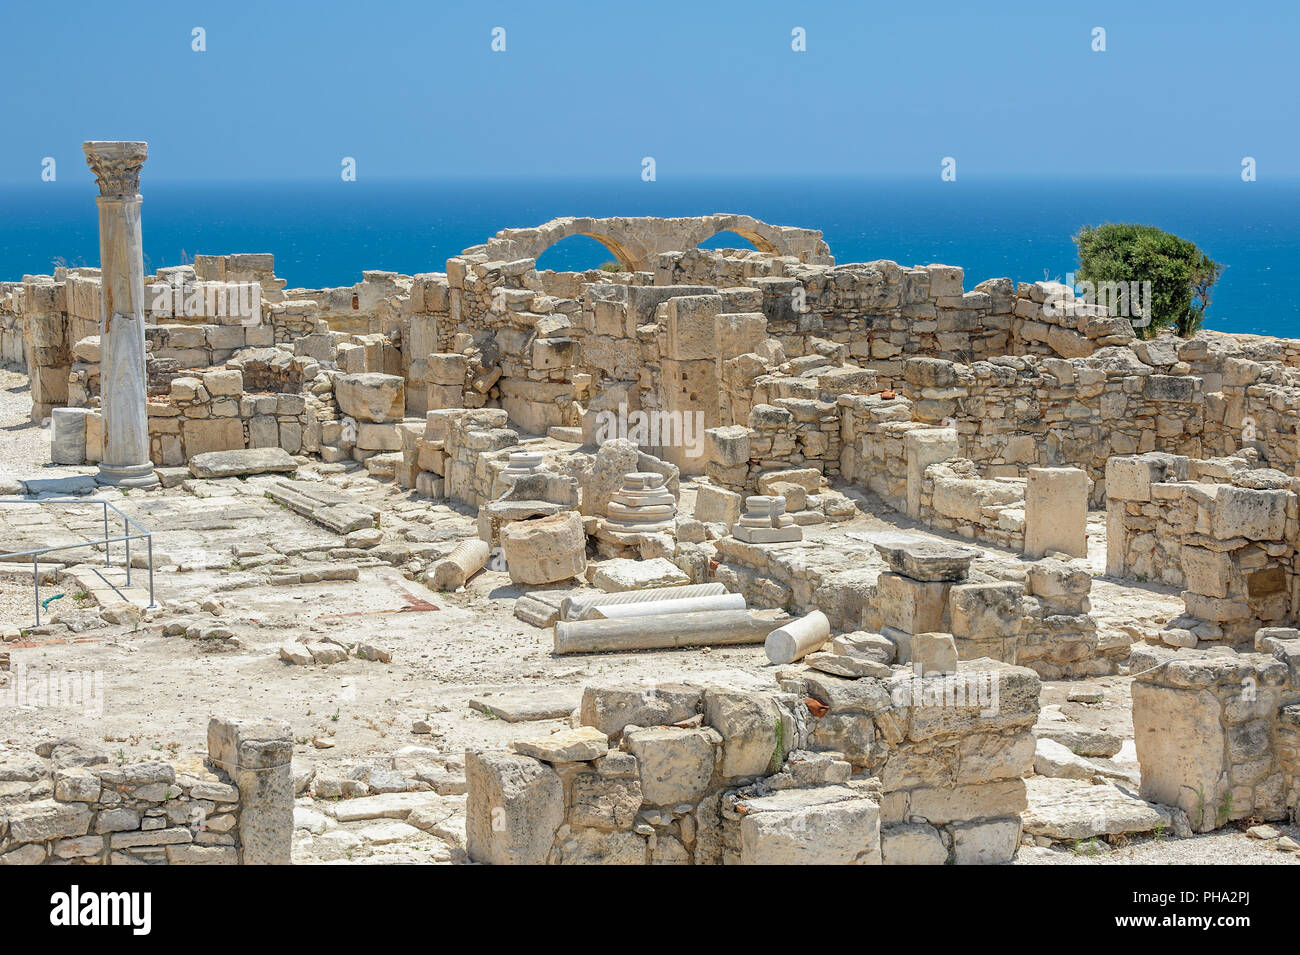 Ruins of basilica in ancient town Kourion on Cyprus Stock Photo